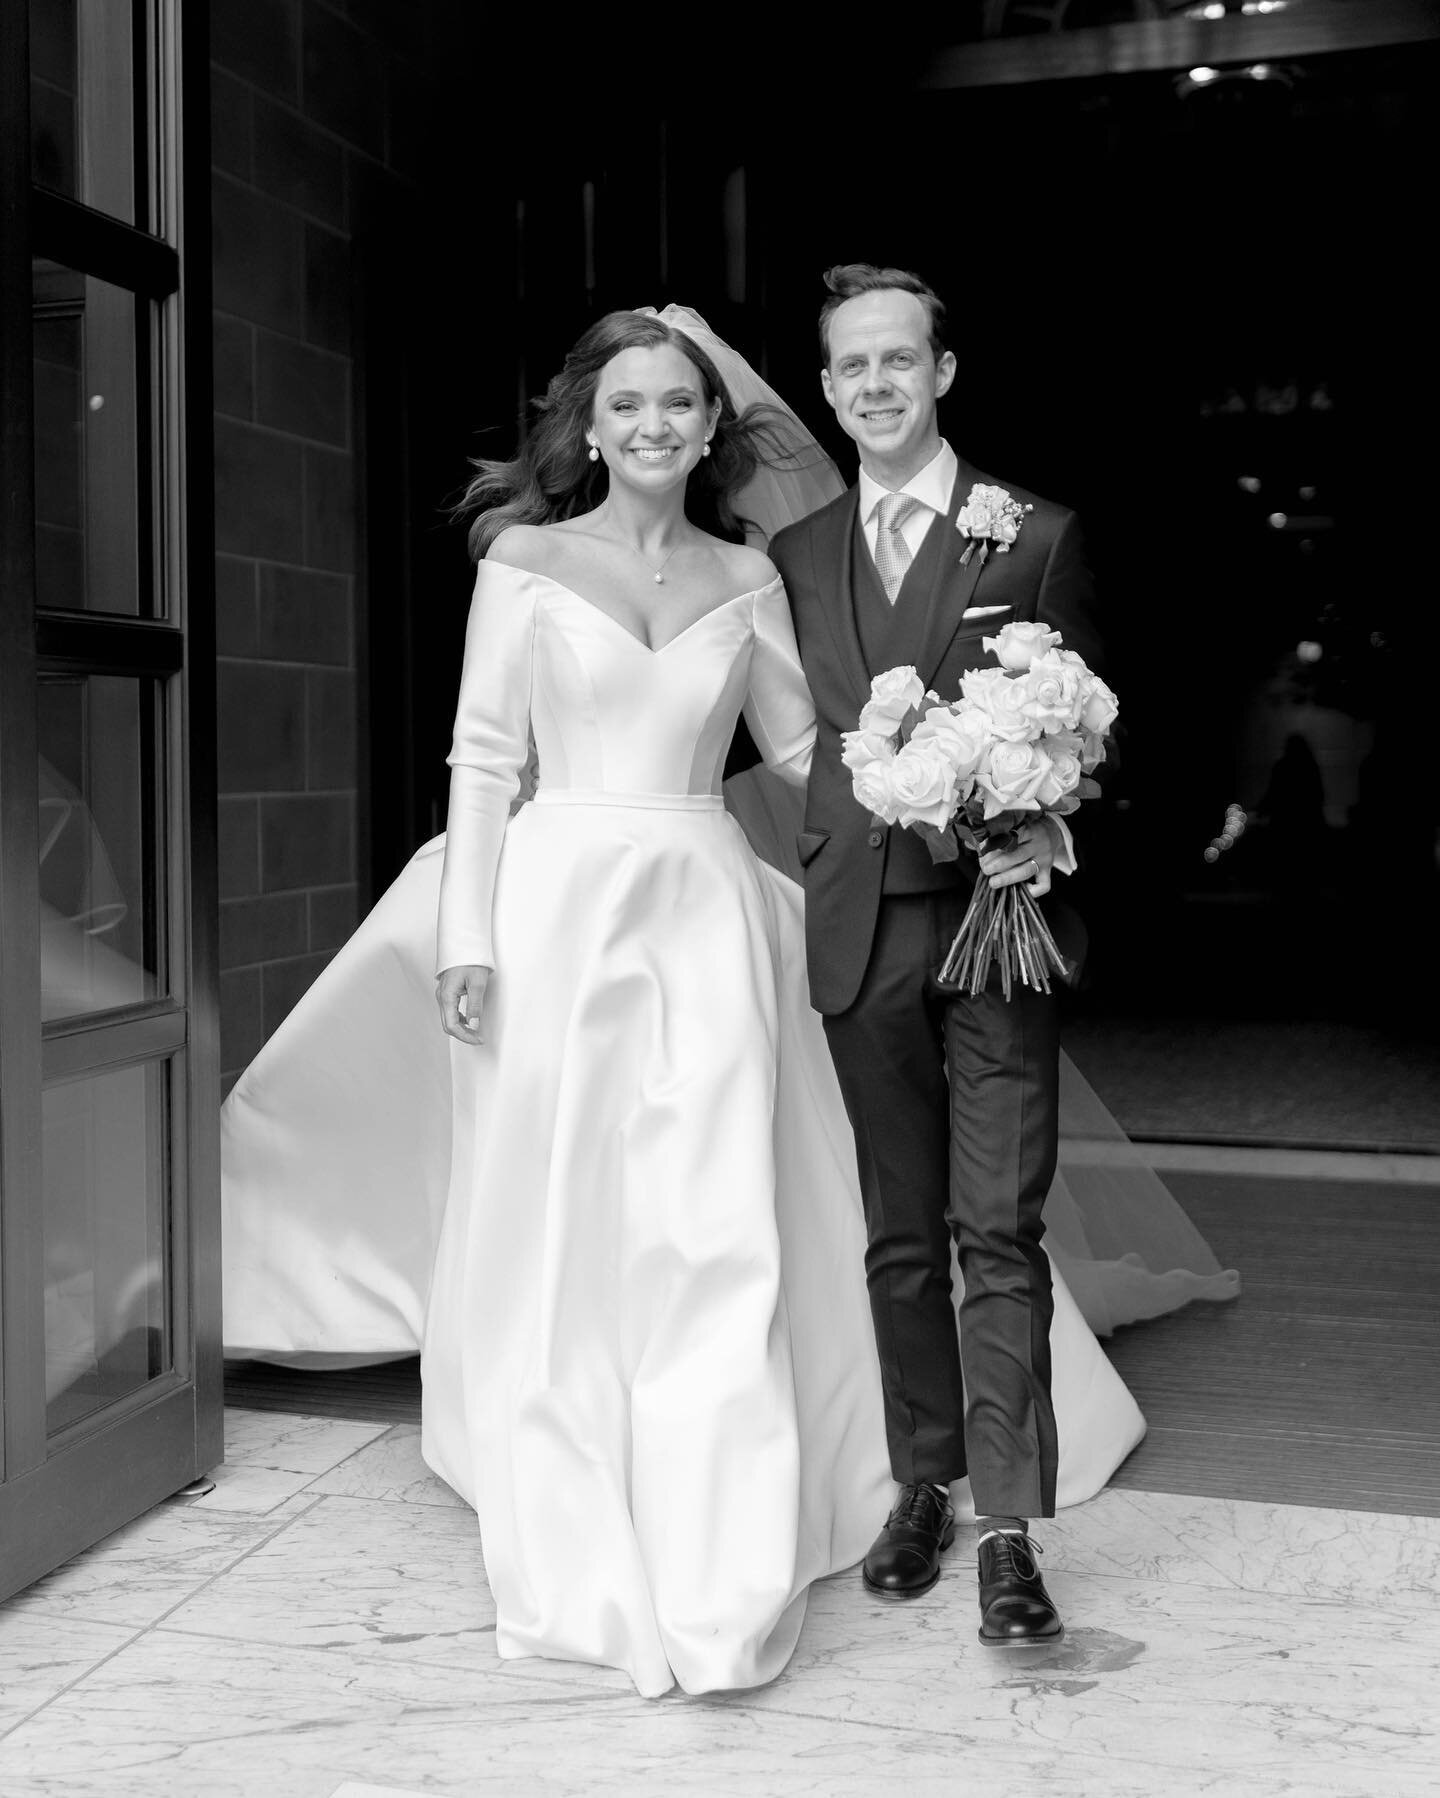 Beautiful memories from this incredible day with Nicky and Chris 

Venue @kimptonfitzroy
Planner @weddingsbyjennahewitt 
Dress @suzanneneville
Hair and Makeup @botiashairandmakeup
Flowers @libertylaneflowers
Cake @annalewiscakedesign
Band @thesupersh